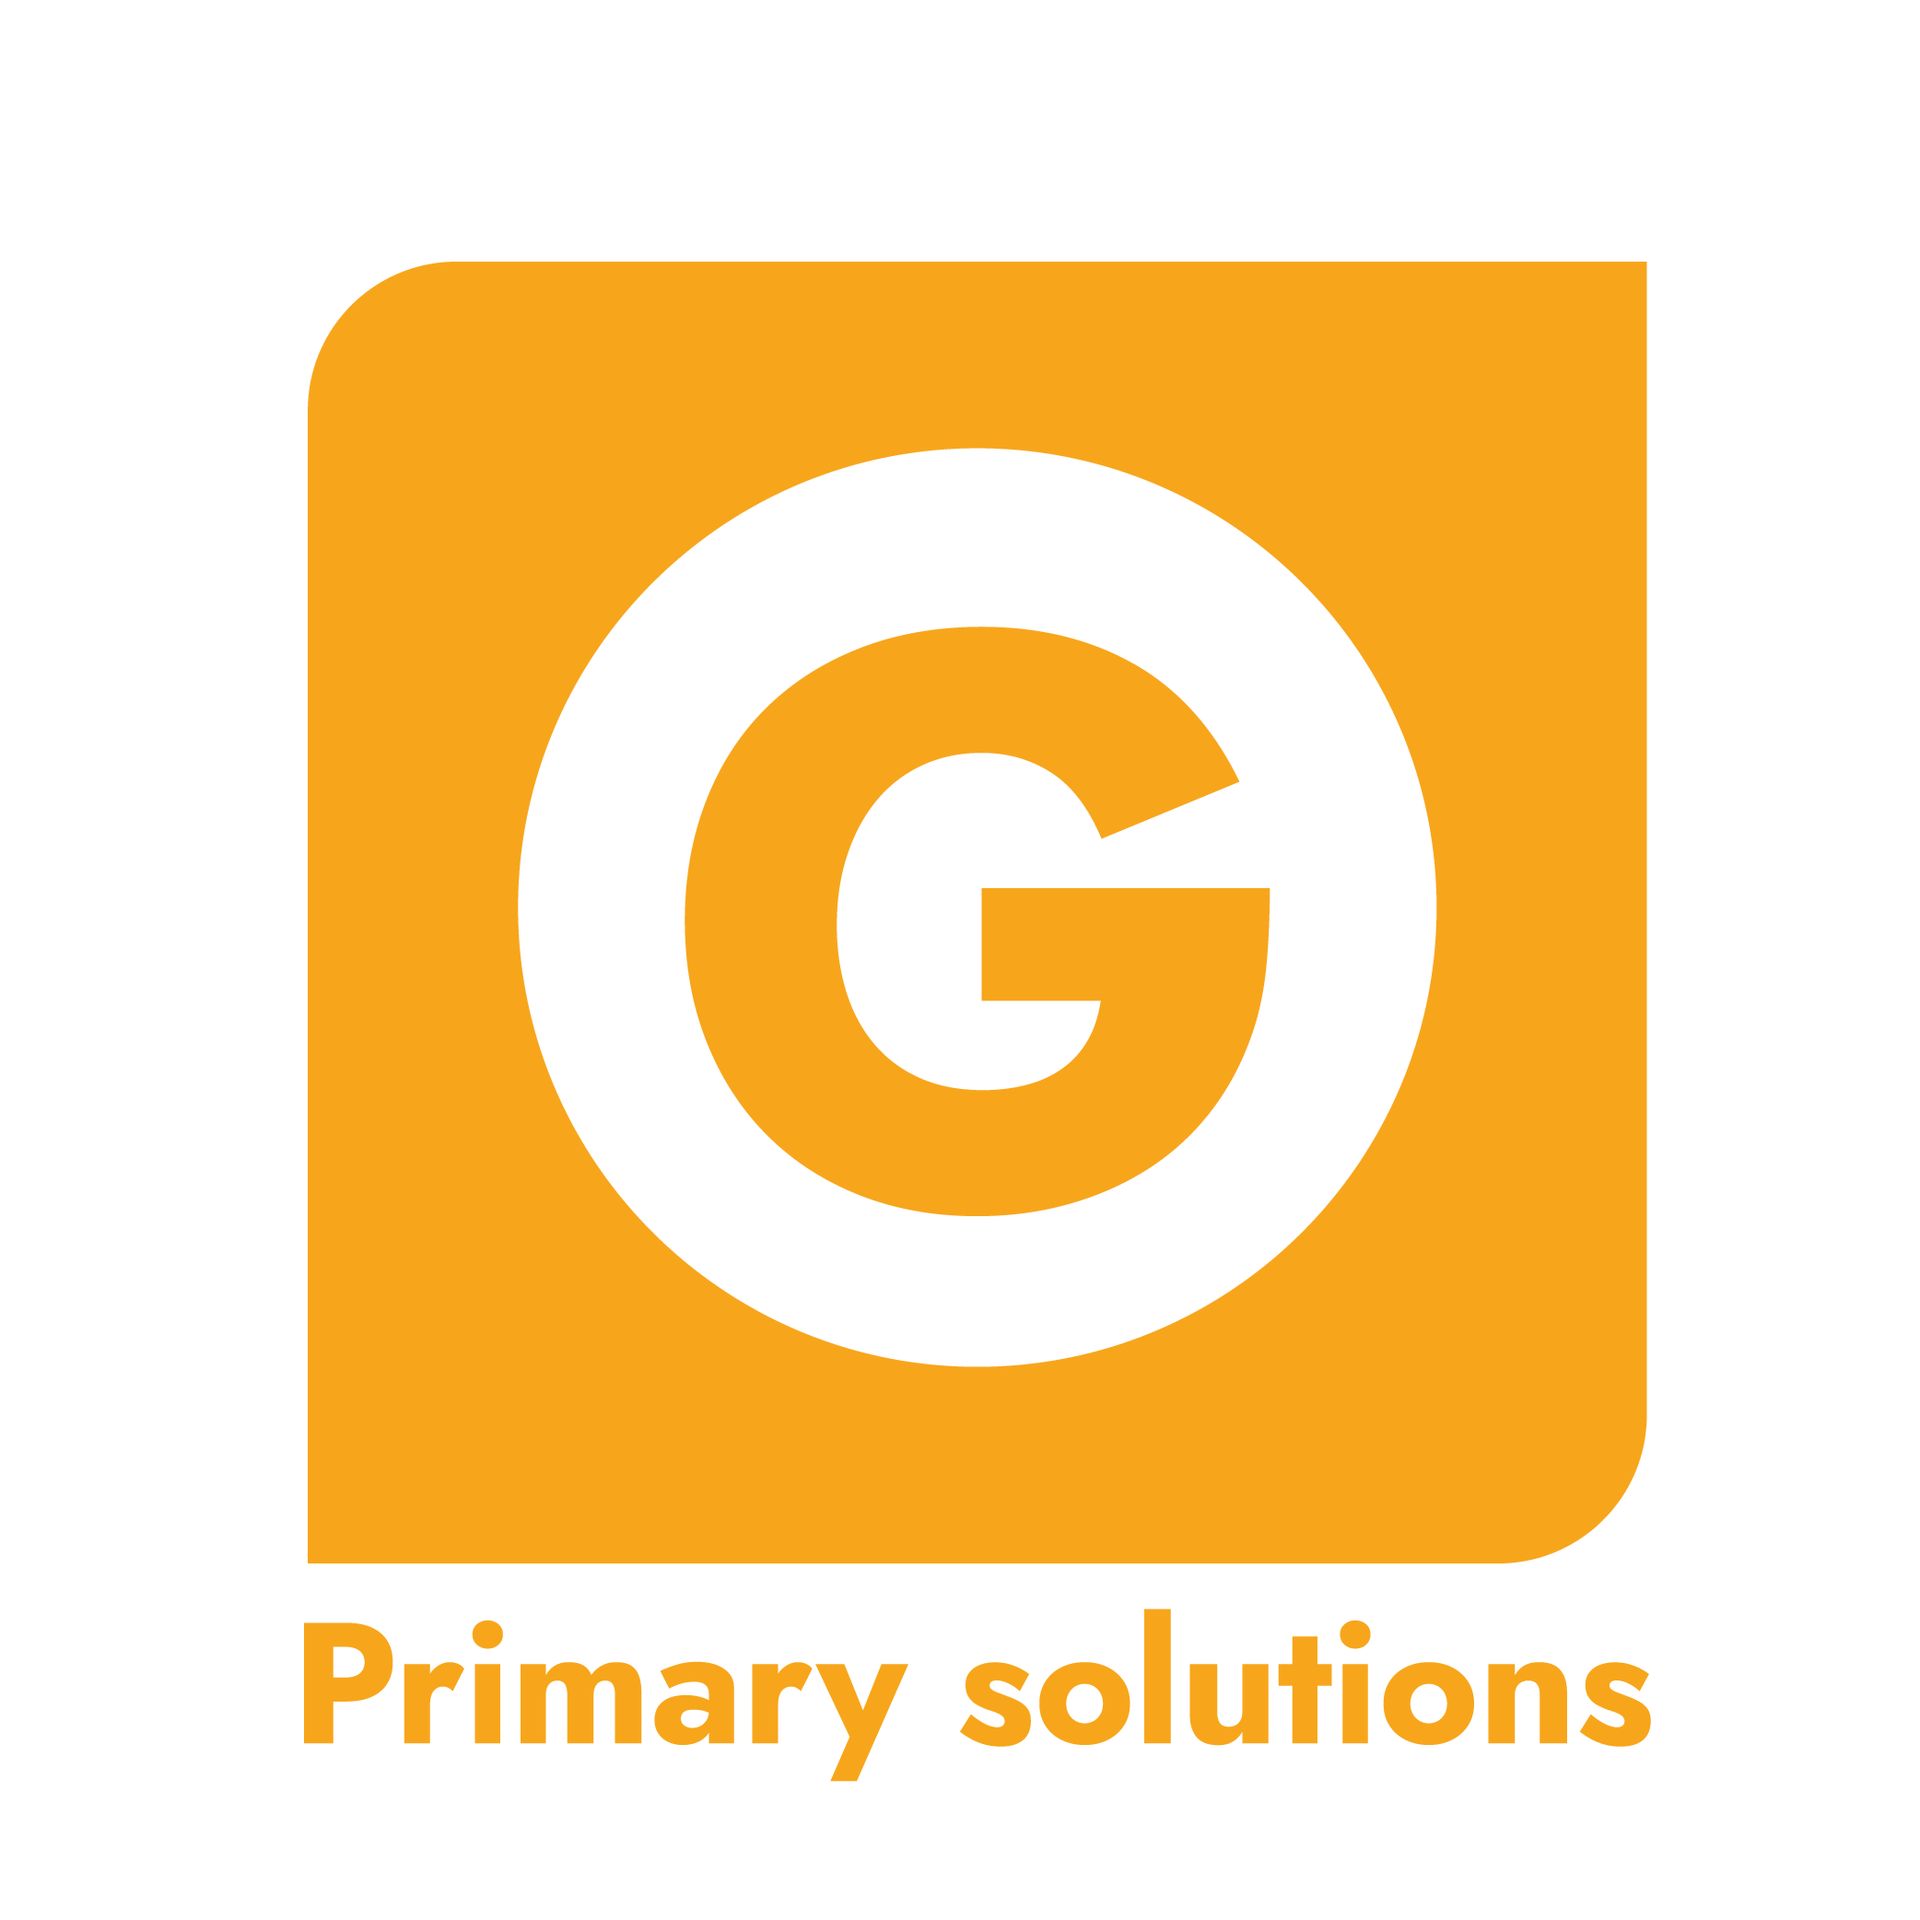 GLOBALG.A.P. Primary solutions icon over full square white background